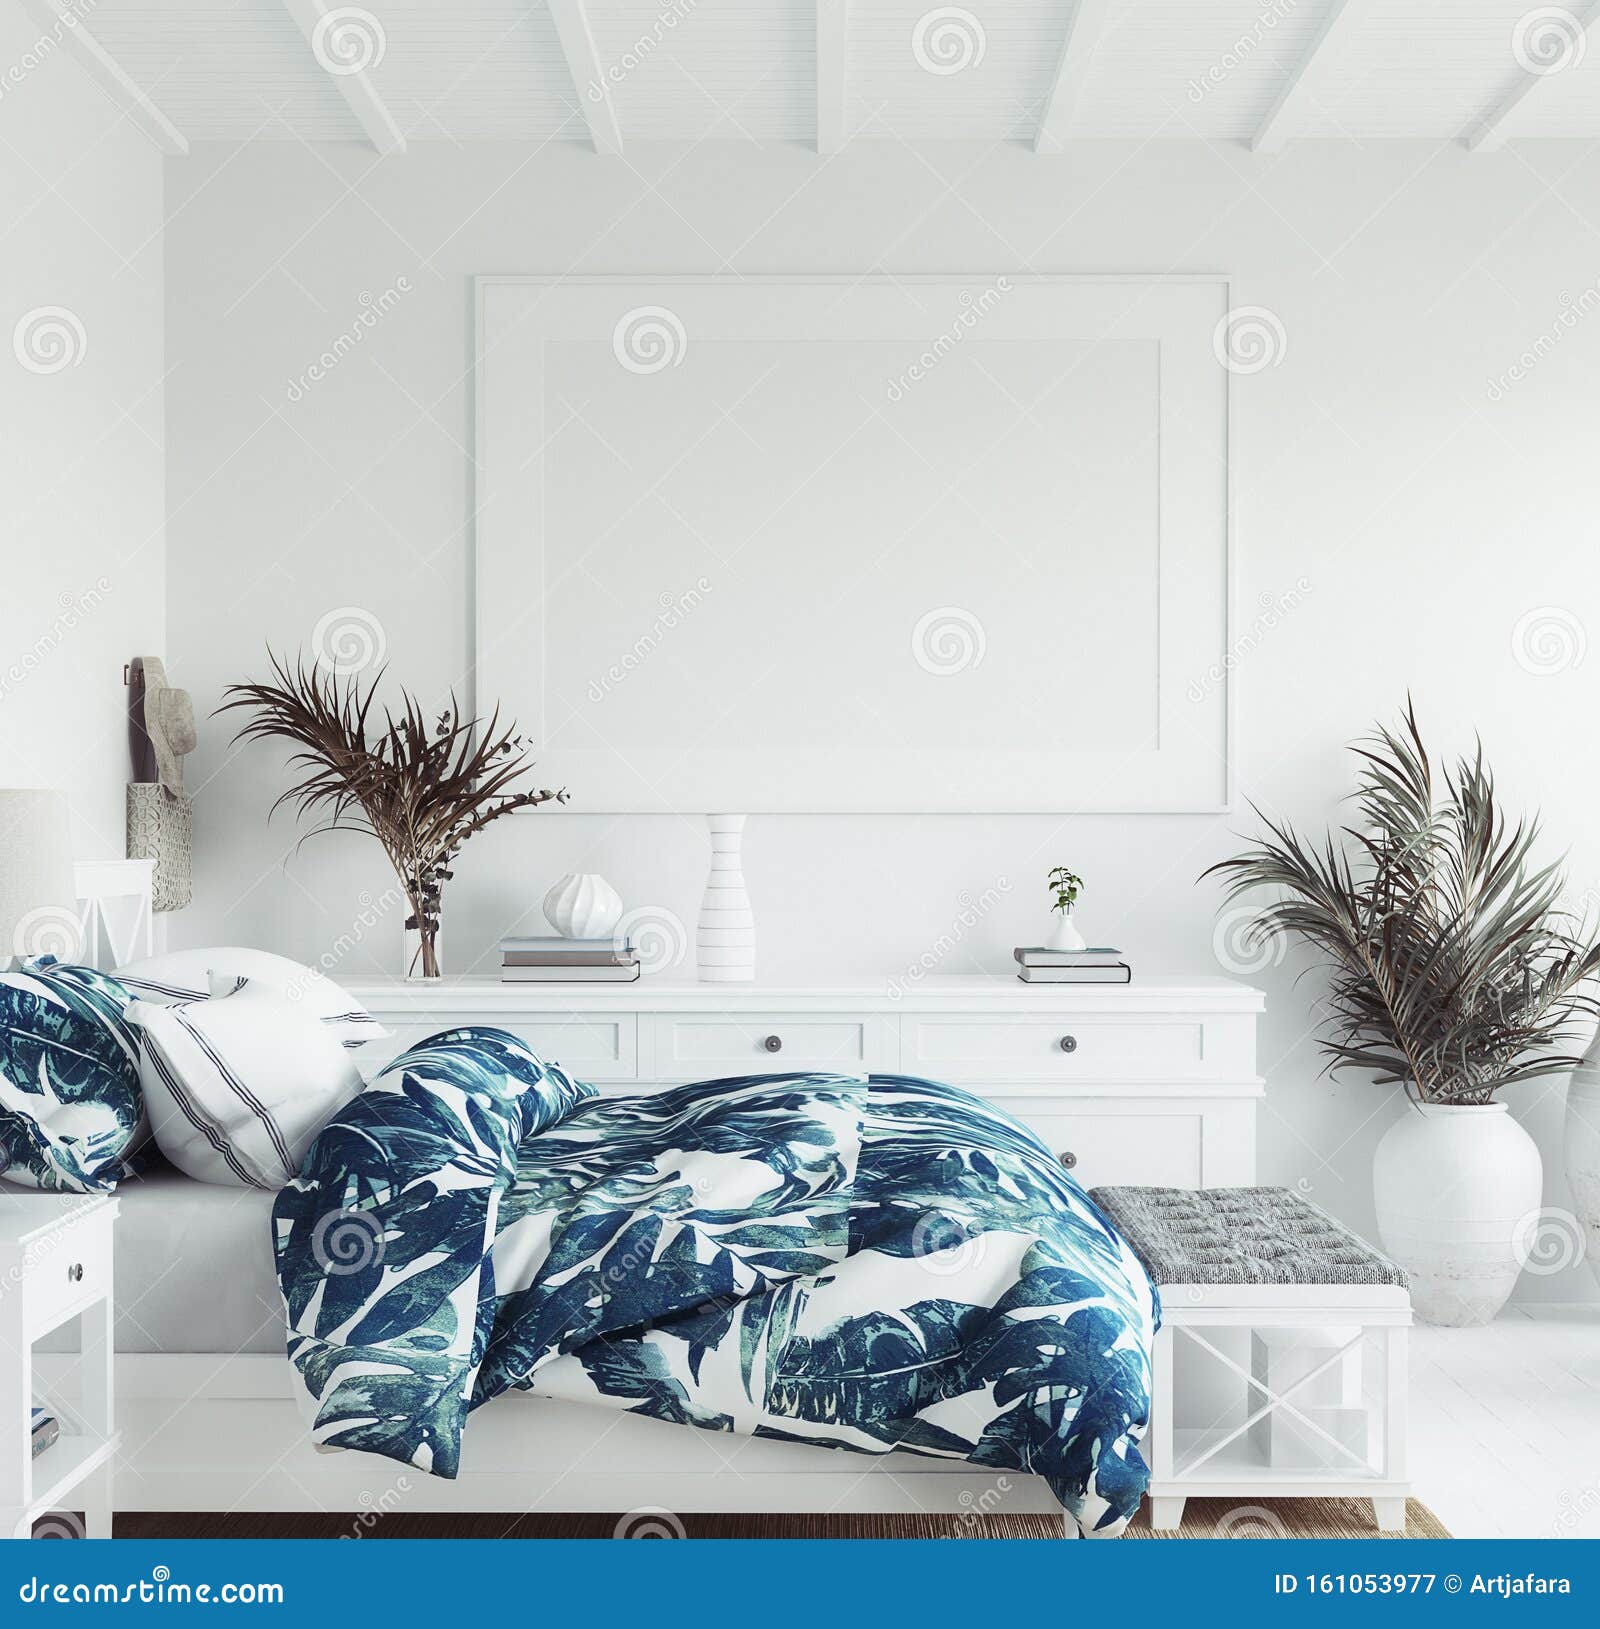 mock up frame in white cozy tropical bedroom interior, coastal style